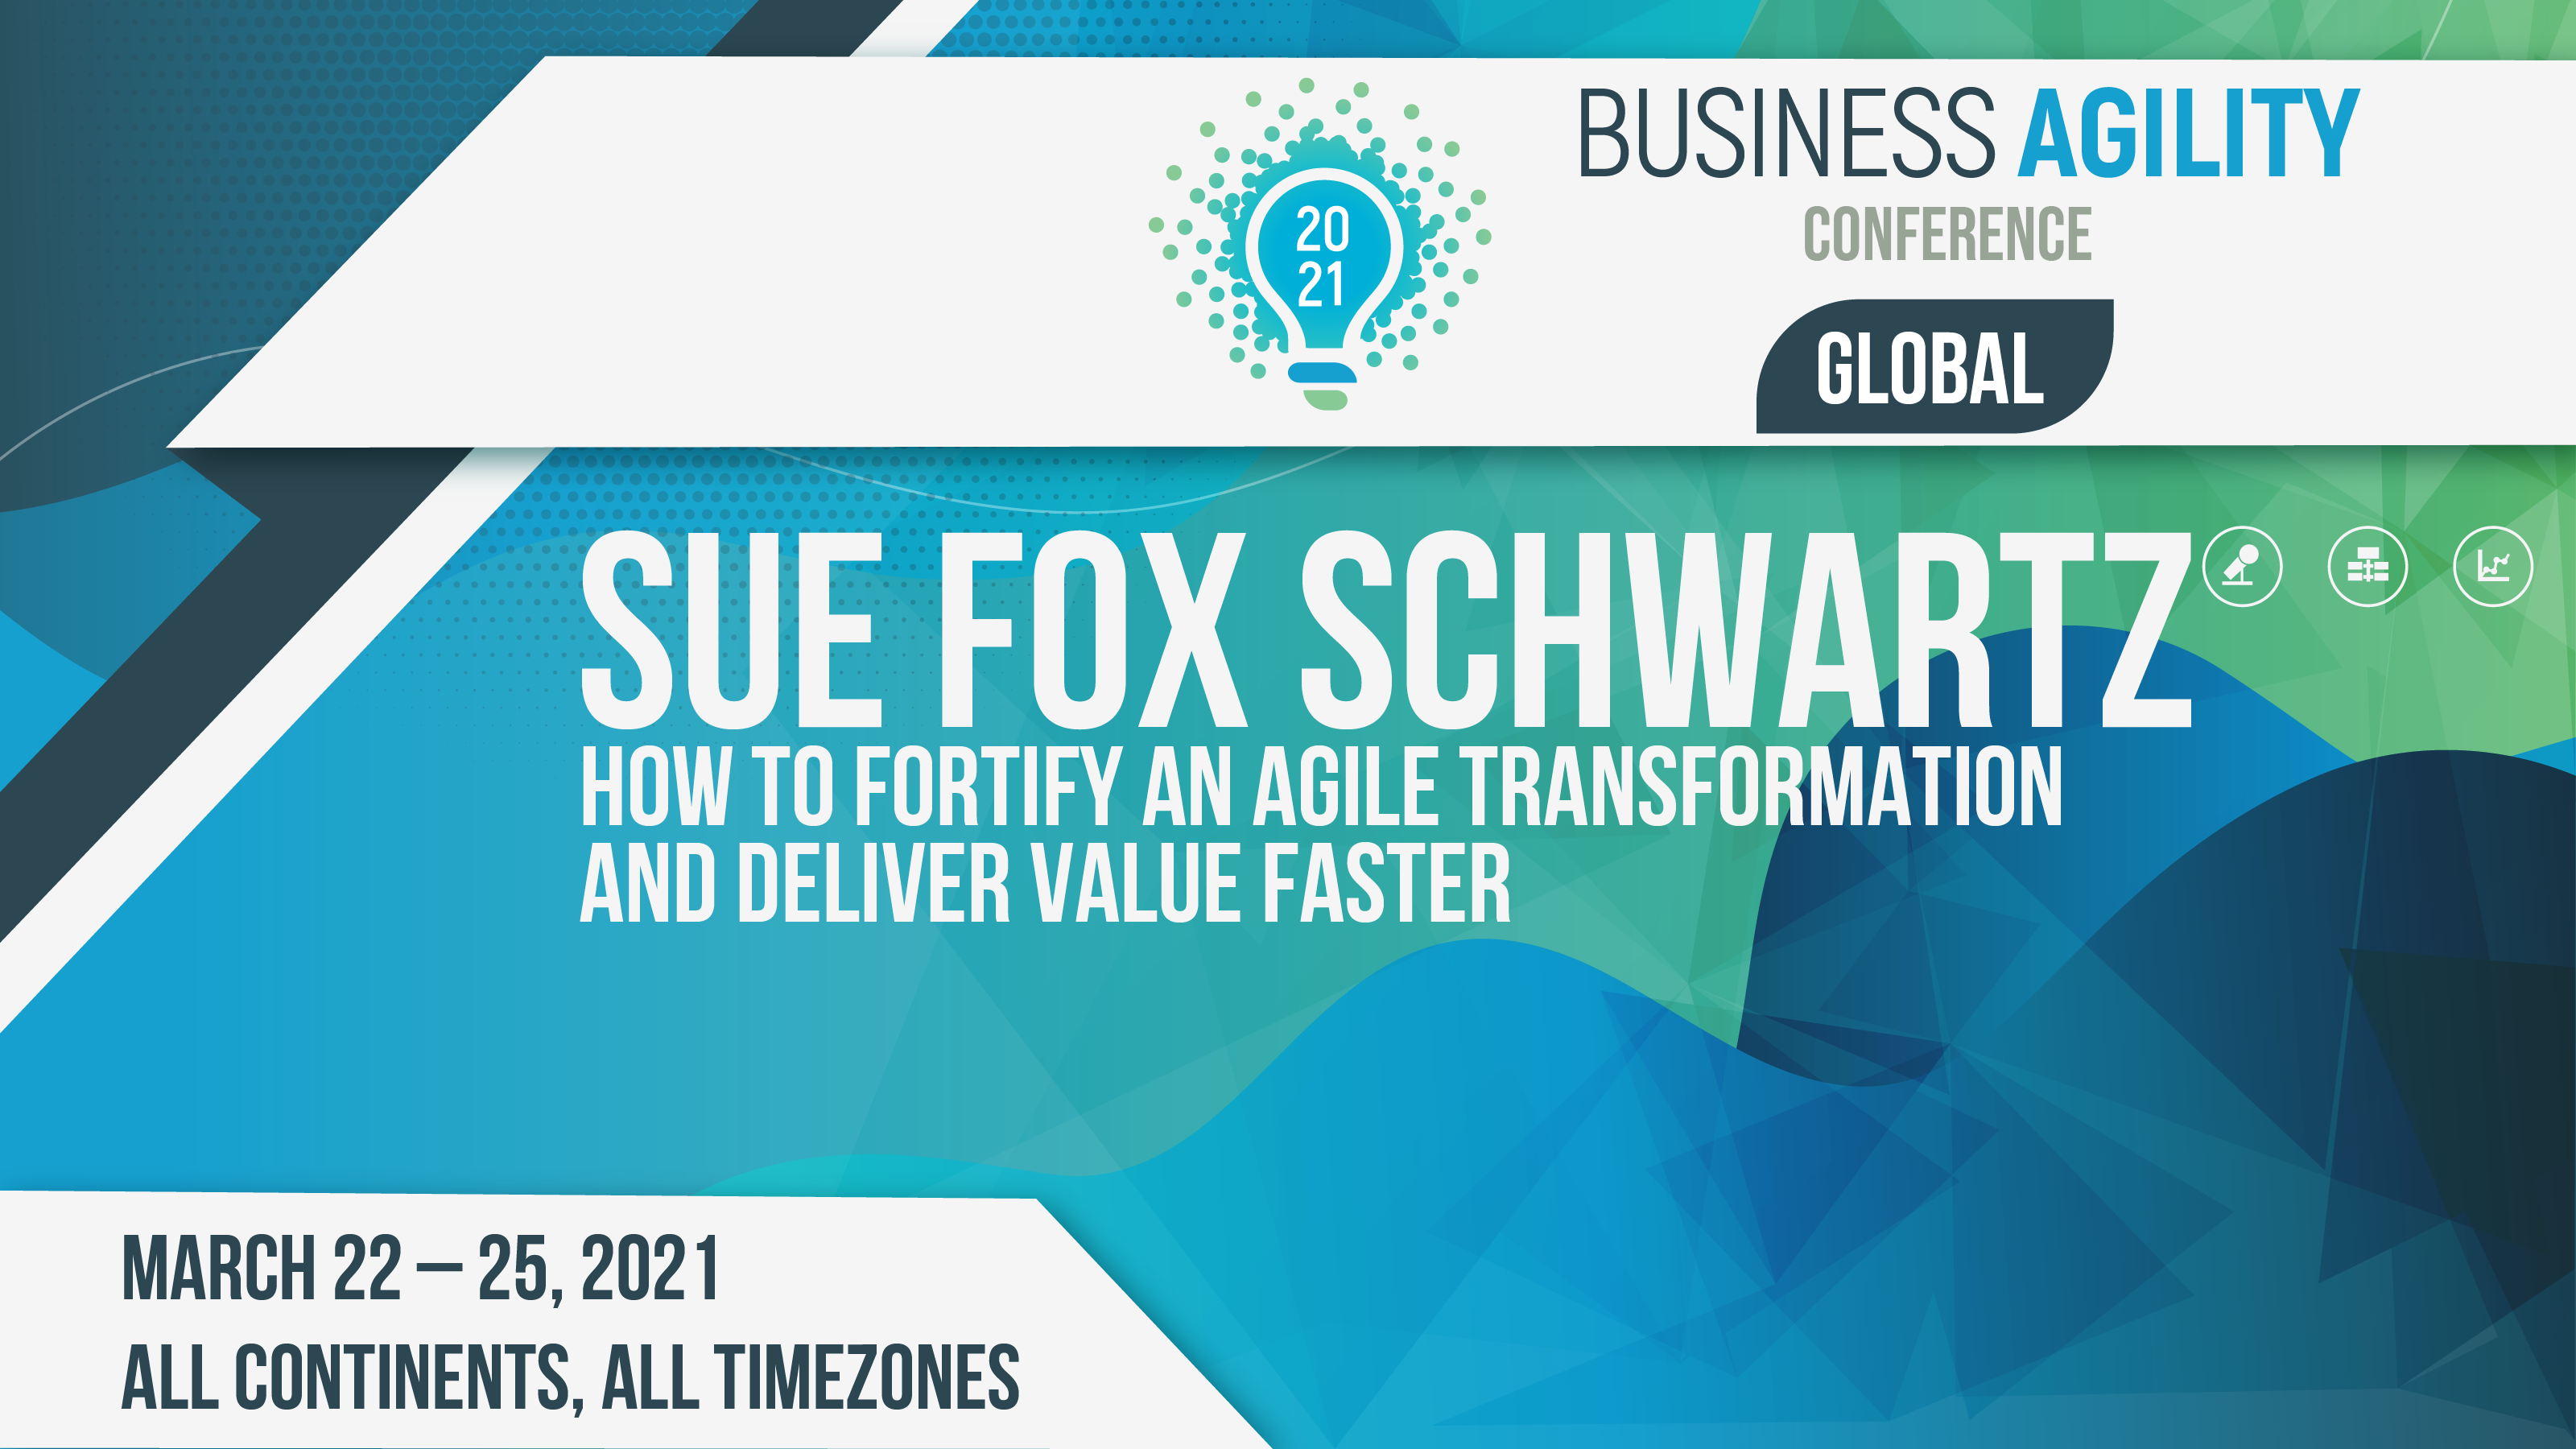 How to Fortify an Agile Transformation and Deliver Value Faster